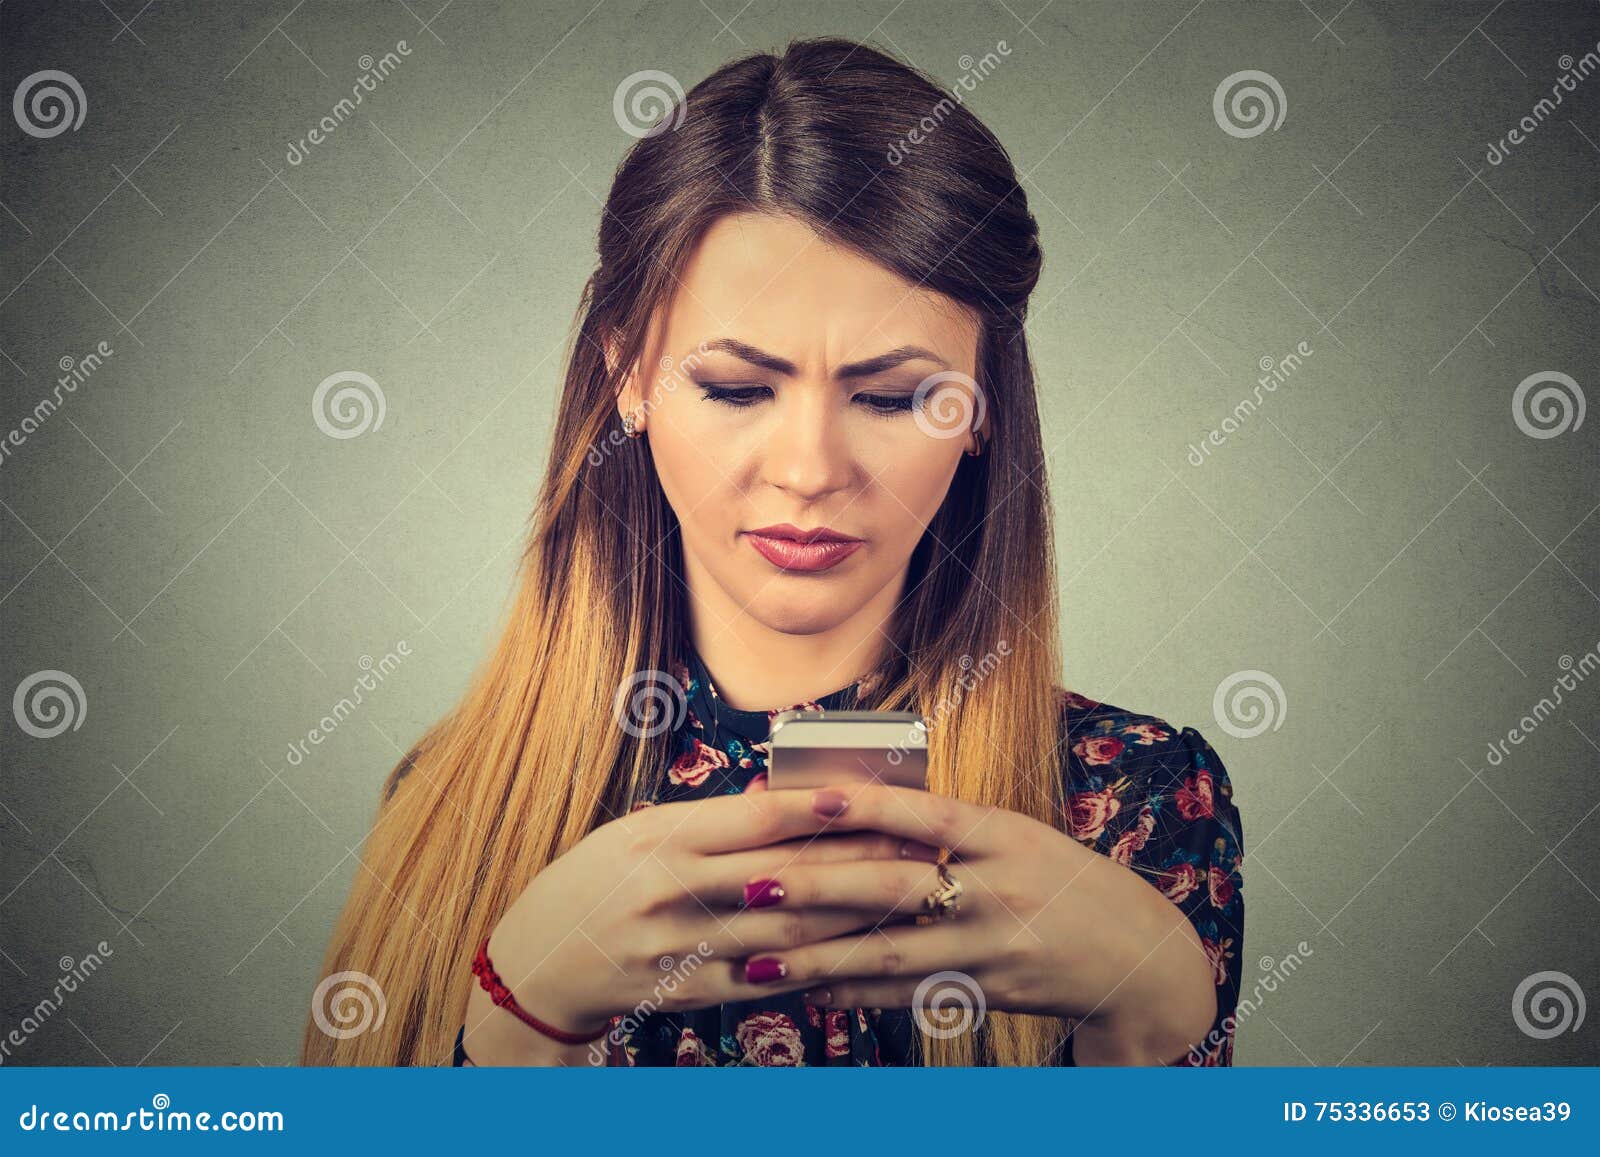 upset woman holding cellphone. sad looking girl texting on smartphone